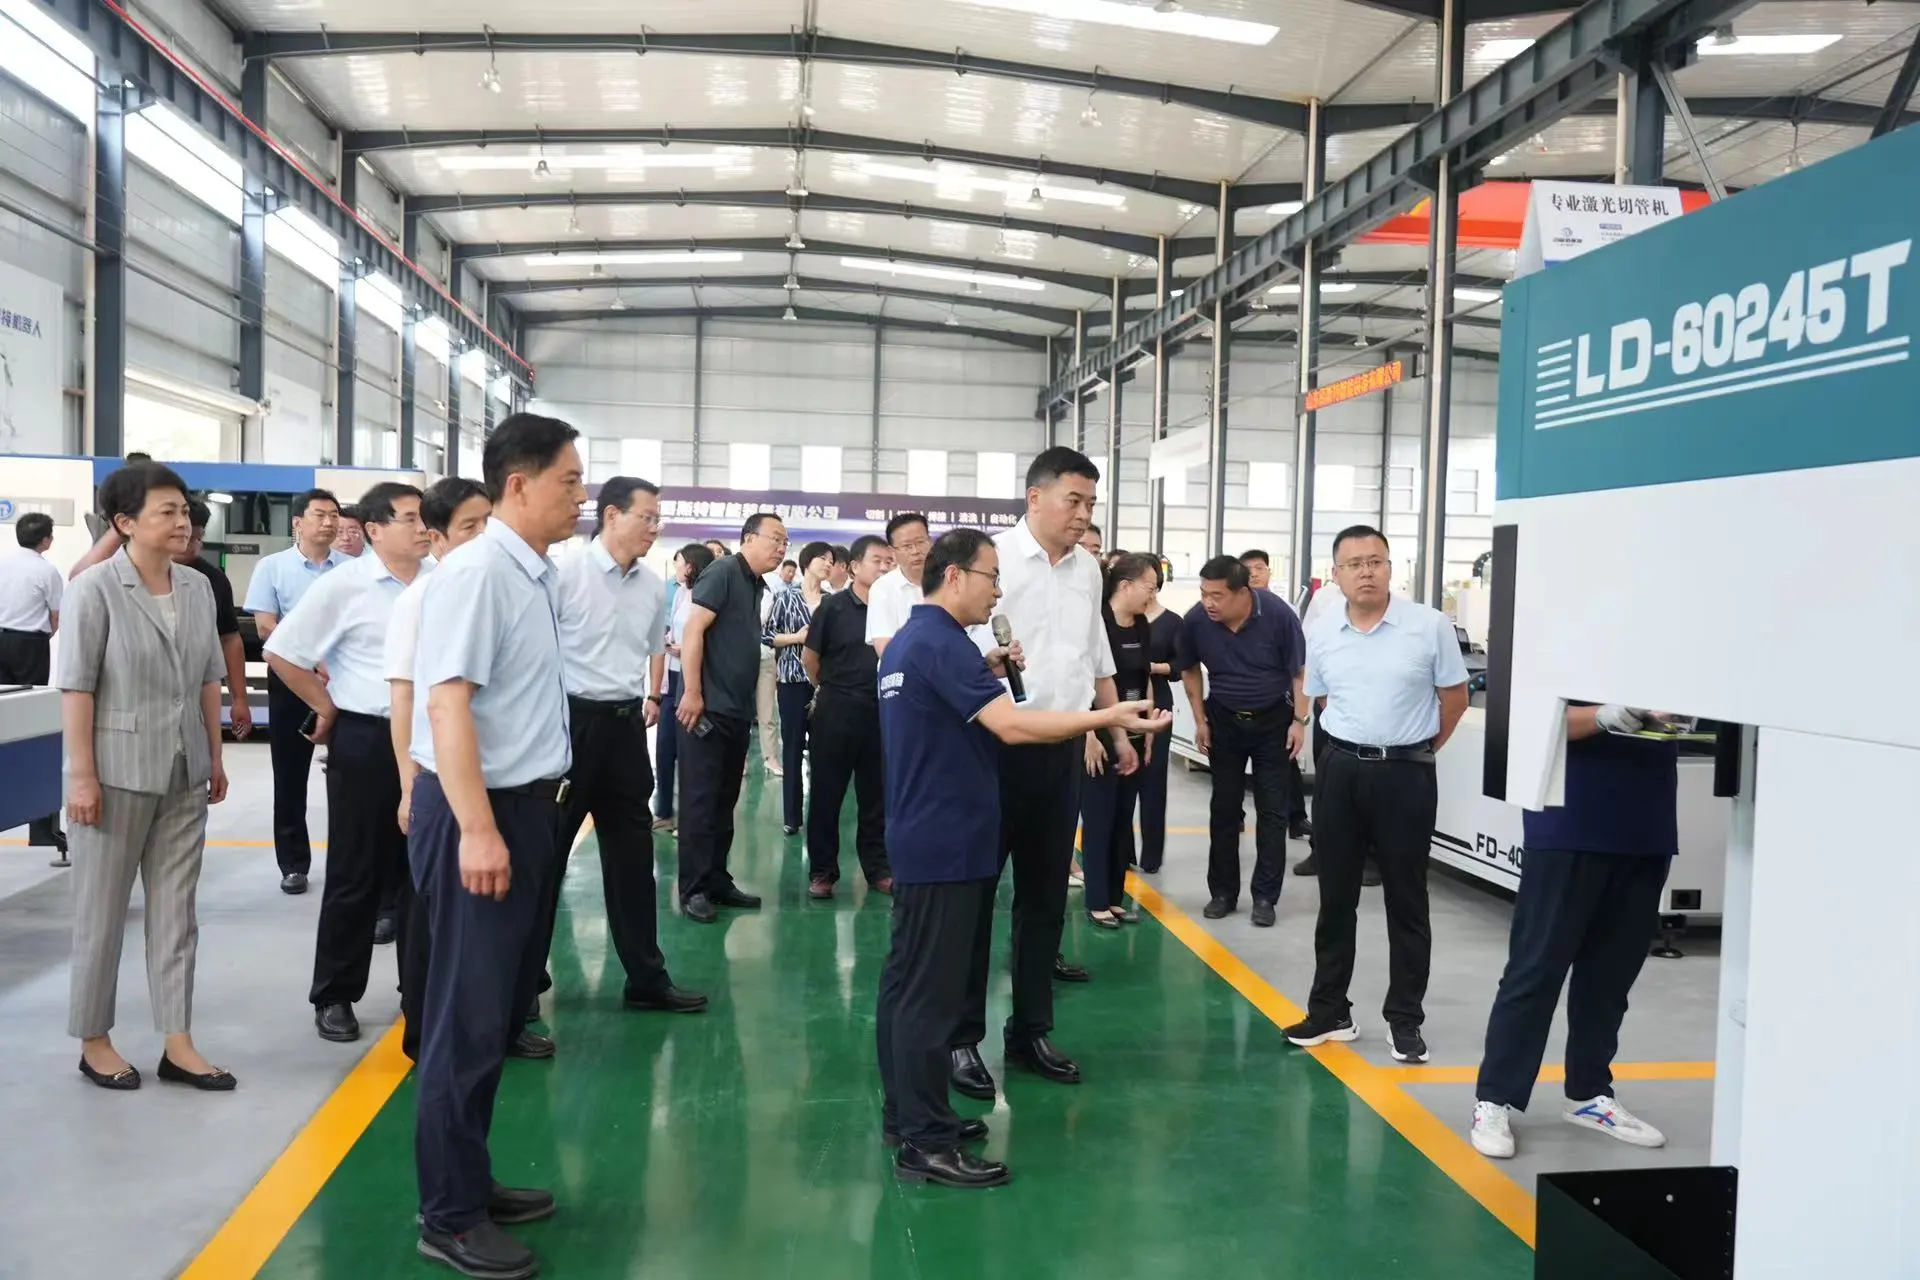 On July 18, 2023, Secretary Ma Zhiyong, Secretary of the Zhangqiu District Party Committee, and all the leaders came to Baister to guide the work.